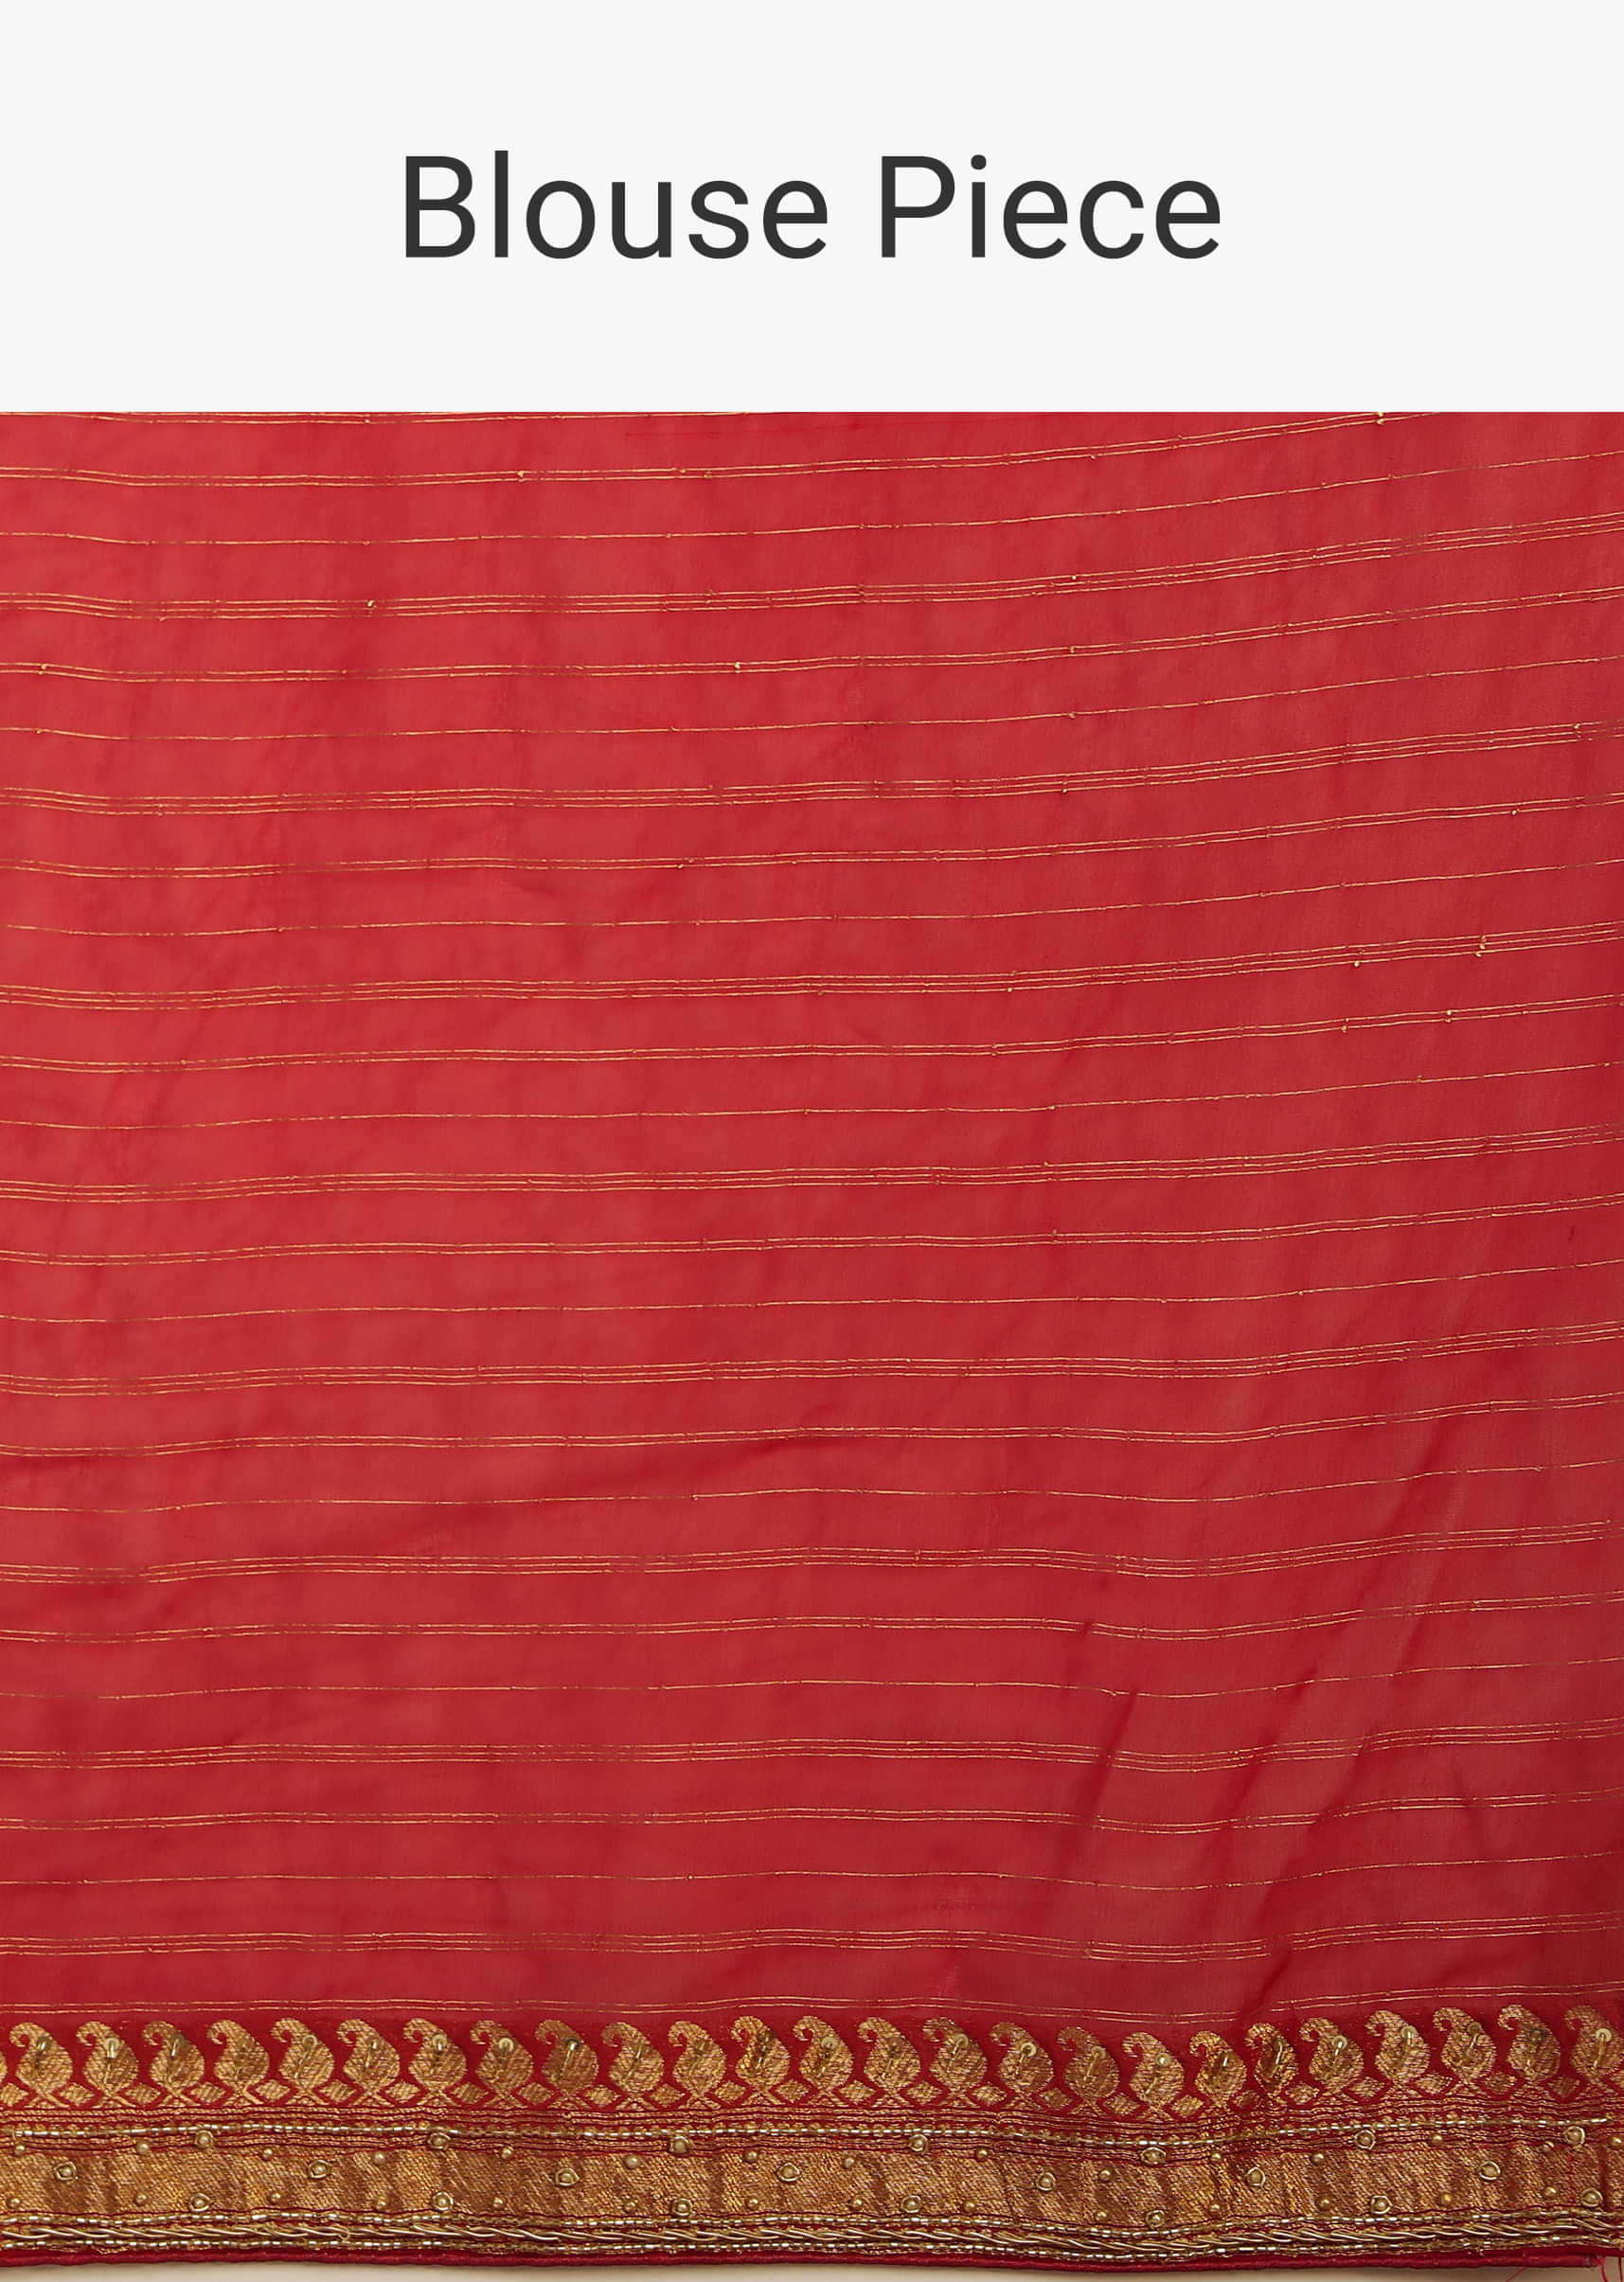 Chinese Red Banarasi Saree In Georgette With Woven Checks And Bandhani Design Along With Zardosi Work  